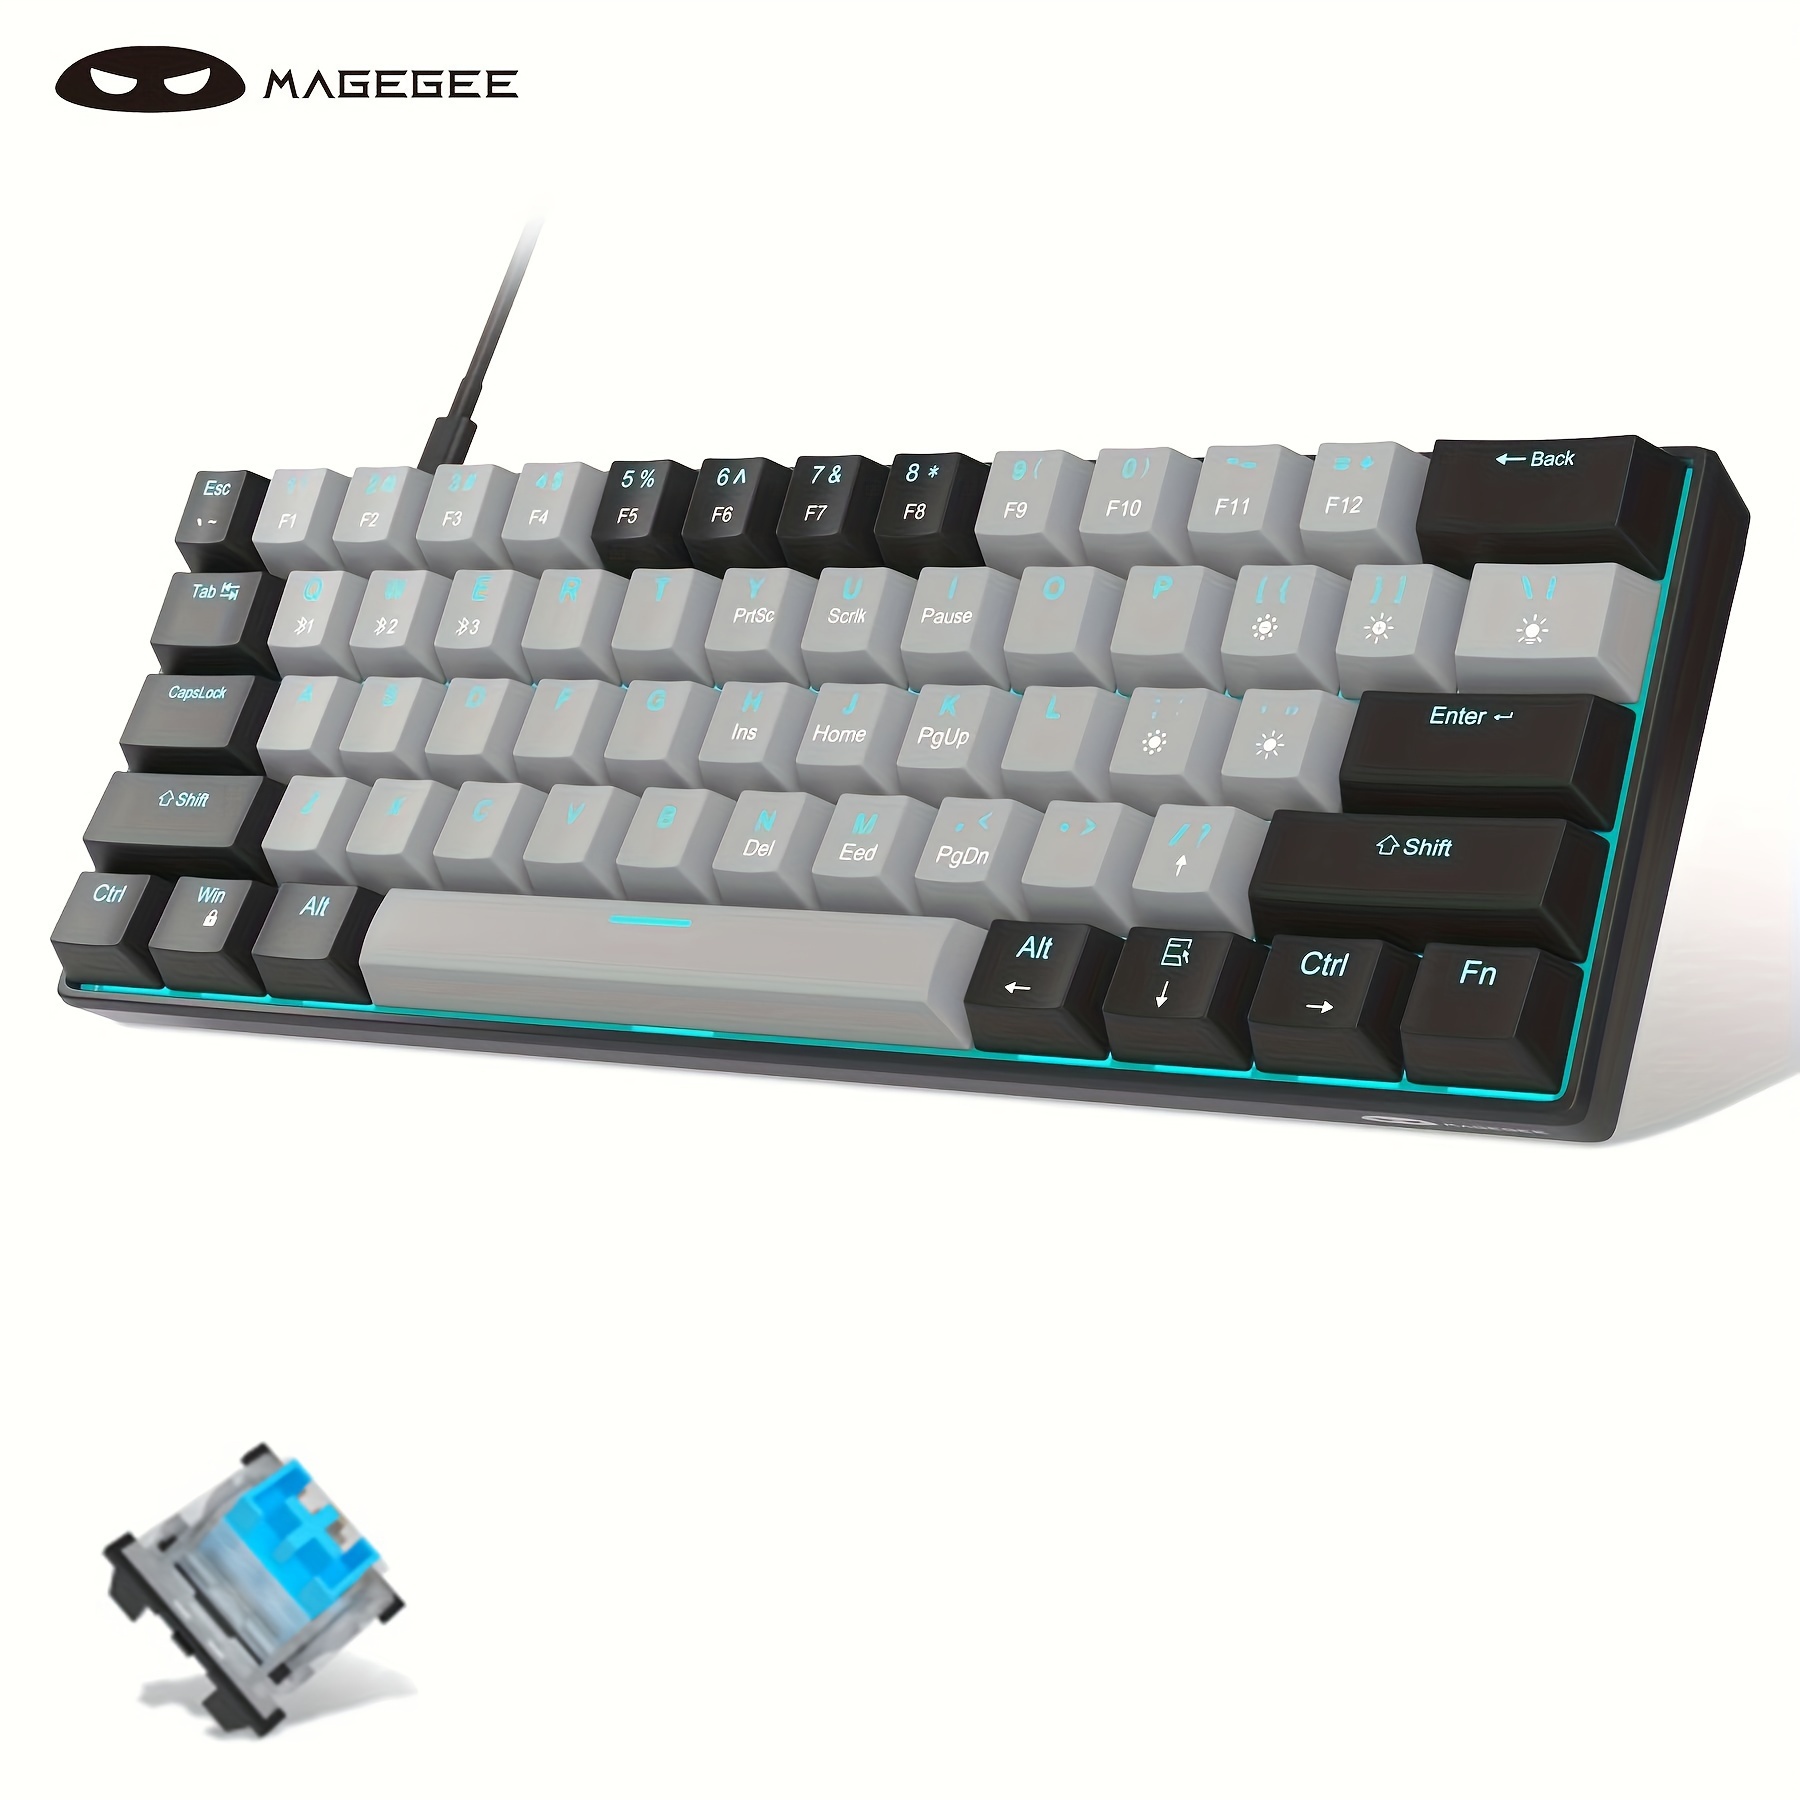 

60% Mechanical Keyboard, Gaming Keyboard With Blue Switches And Sea Blue Backlit Small Compact 60 Percent Keyboard Mechanical, Portable 60 Percent Gaming Keyboard Gamer